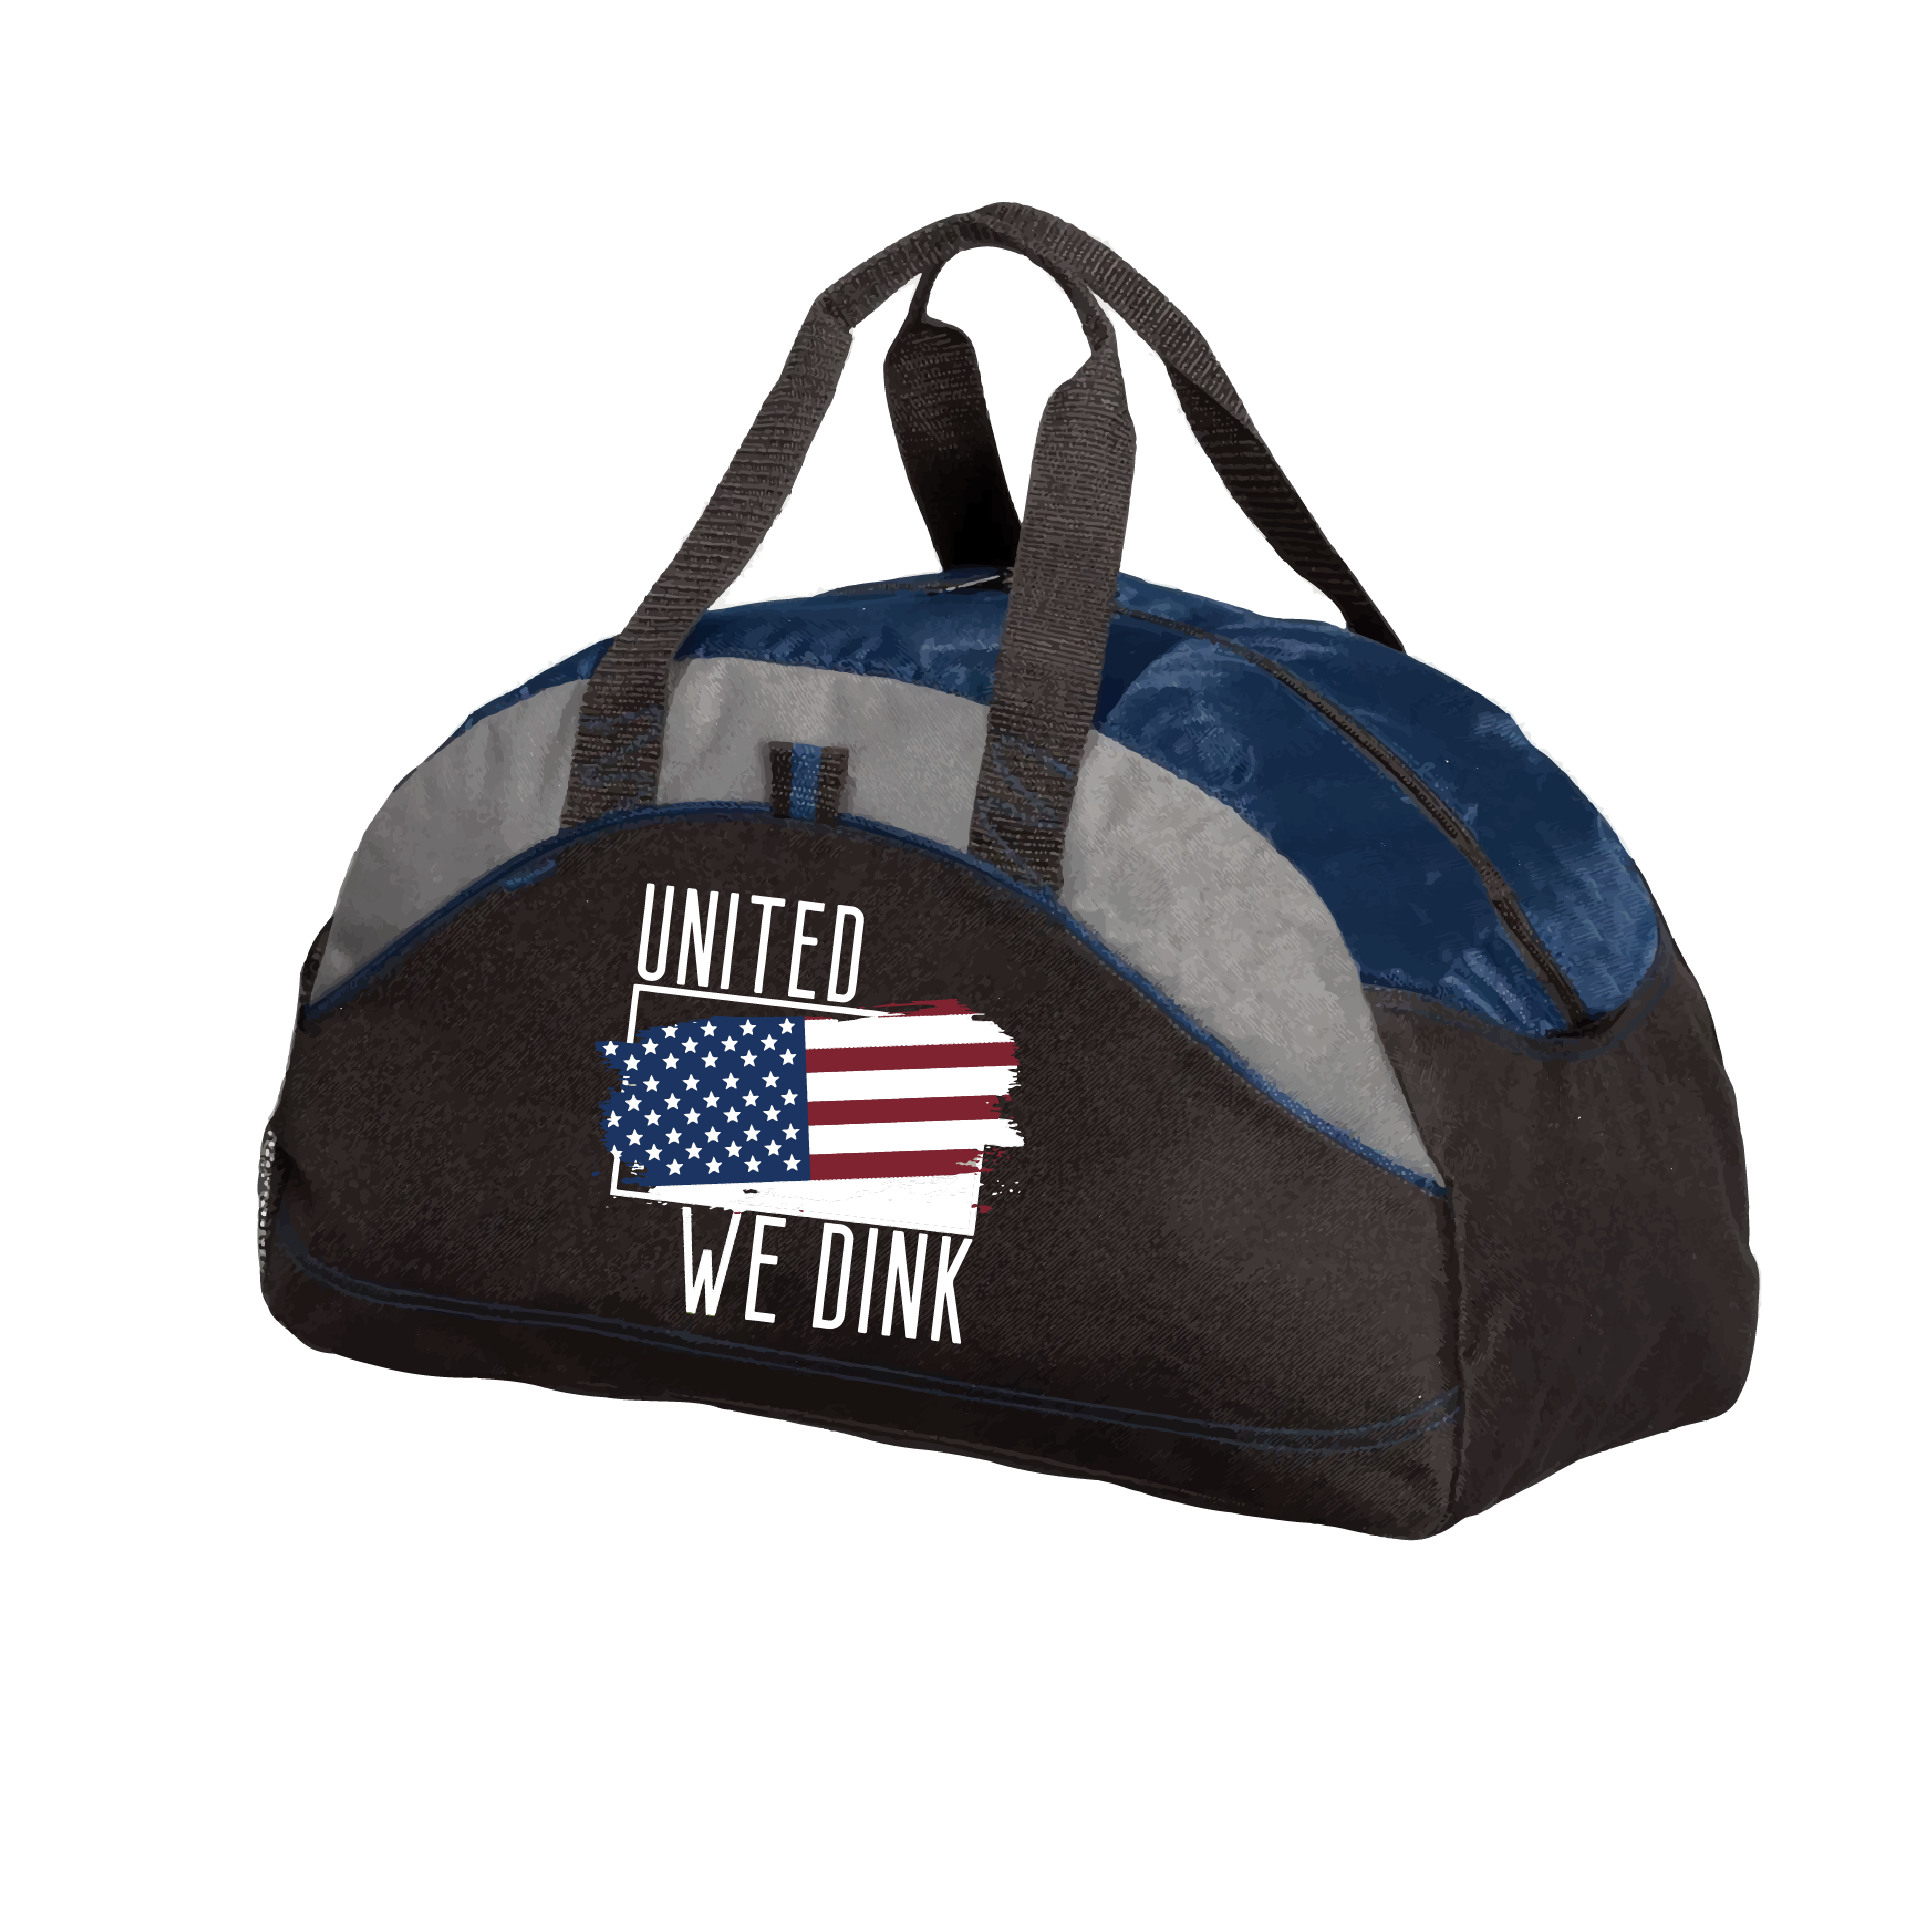 Pickleball Duffel Bag Design: United We Dink  Carry your gear in comfort and style. This fun pickleball duffel bag is the perfect accessory for all pickleball players needing to keep their gear in one place. This medium sized duffel tote is ideal for all your pickleball activities. The large center compartment allows for plenty of space and the mesh end pocket is perfect for holding a water bottle.